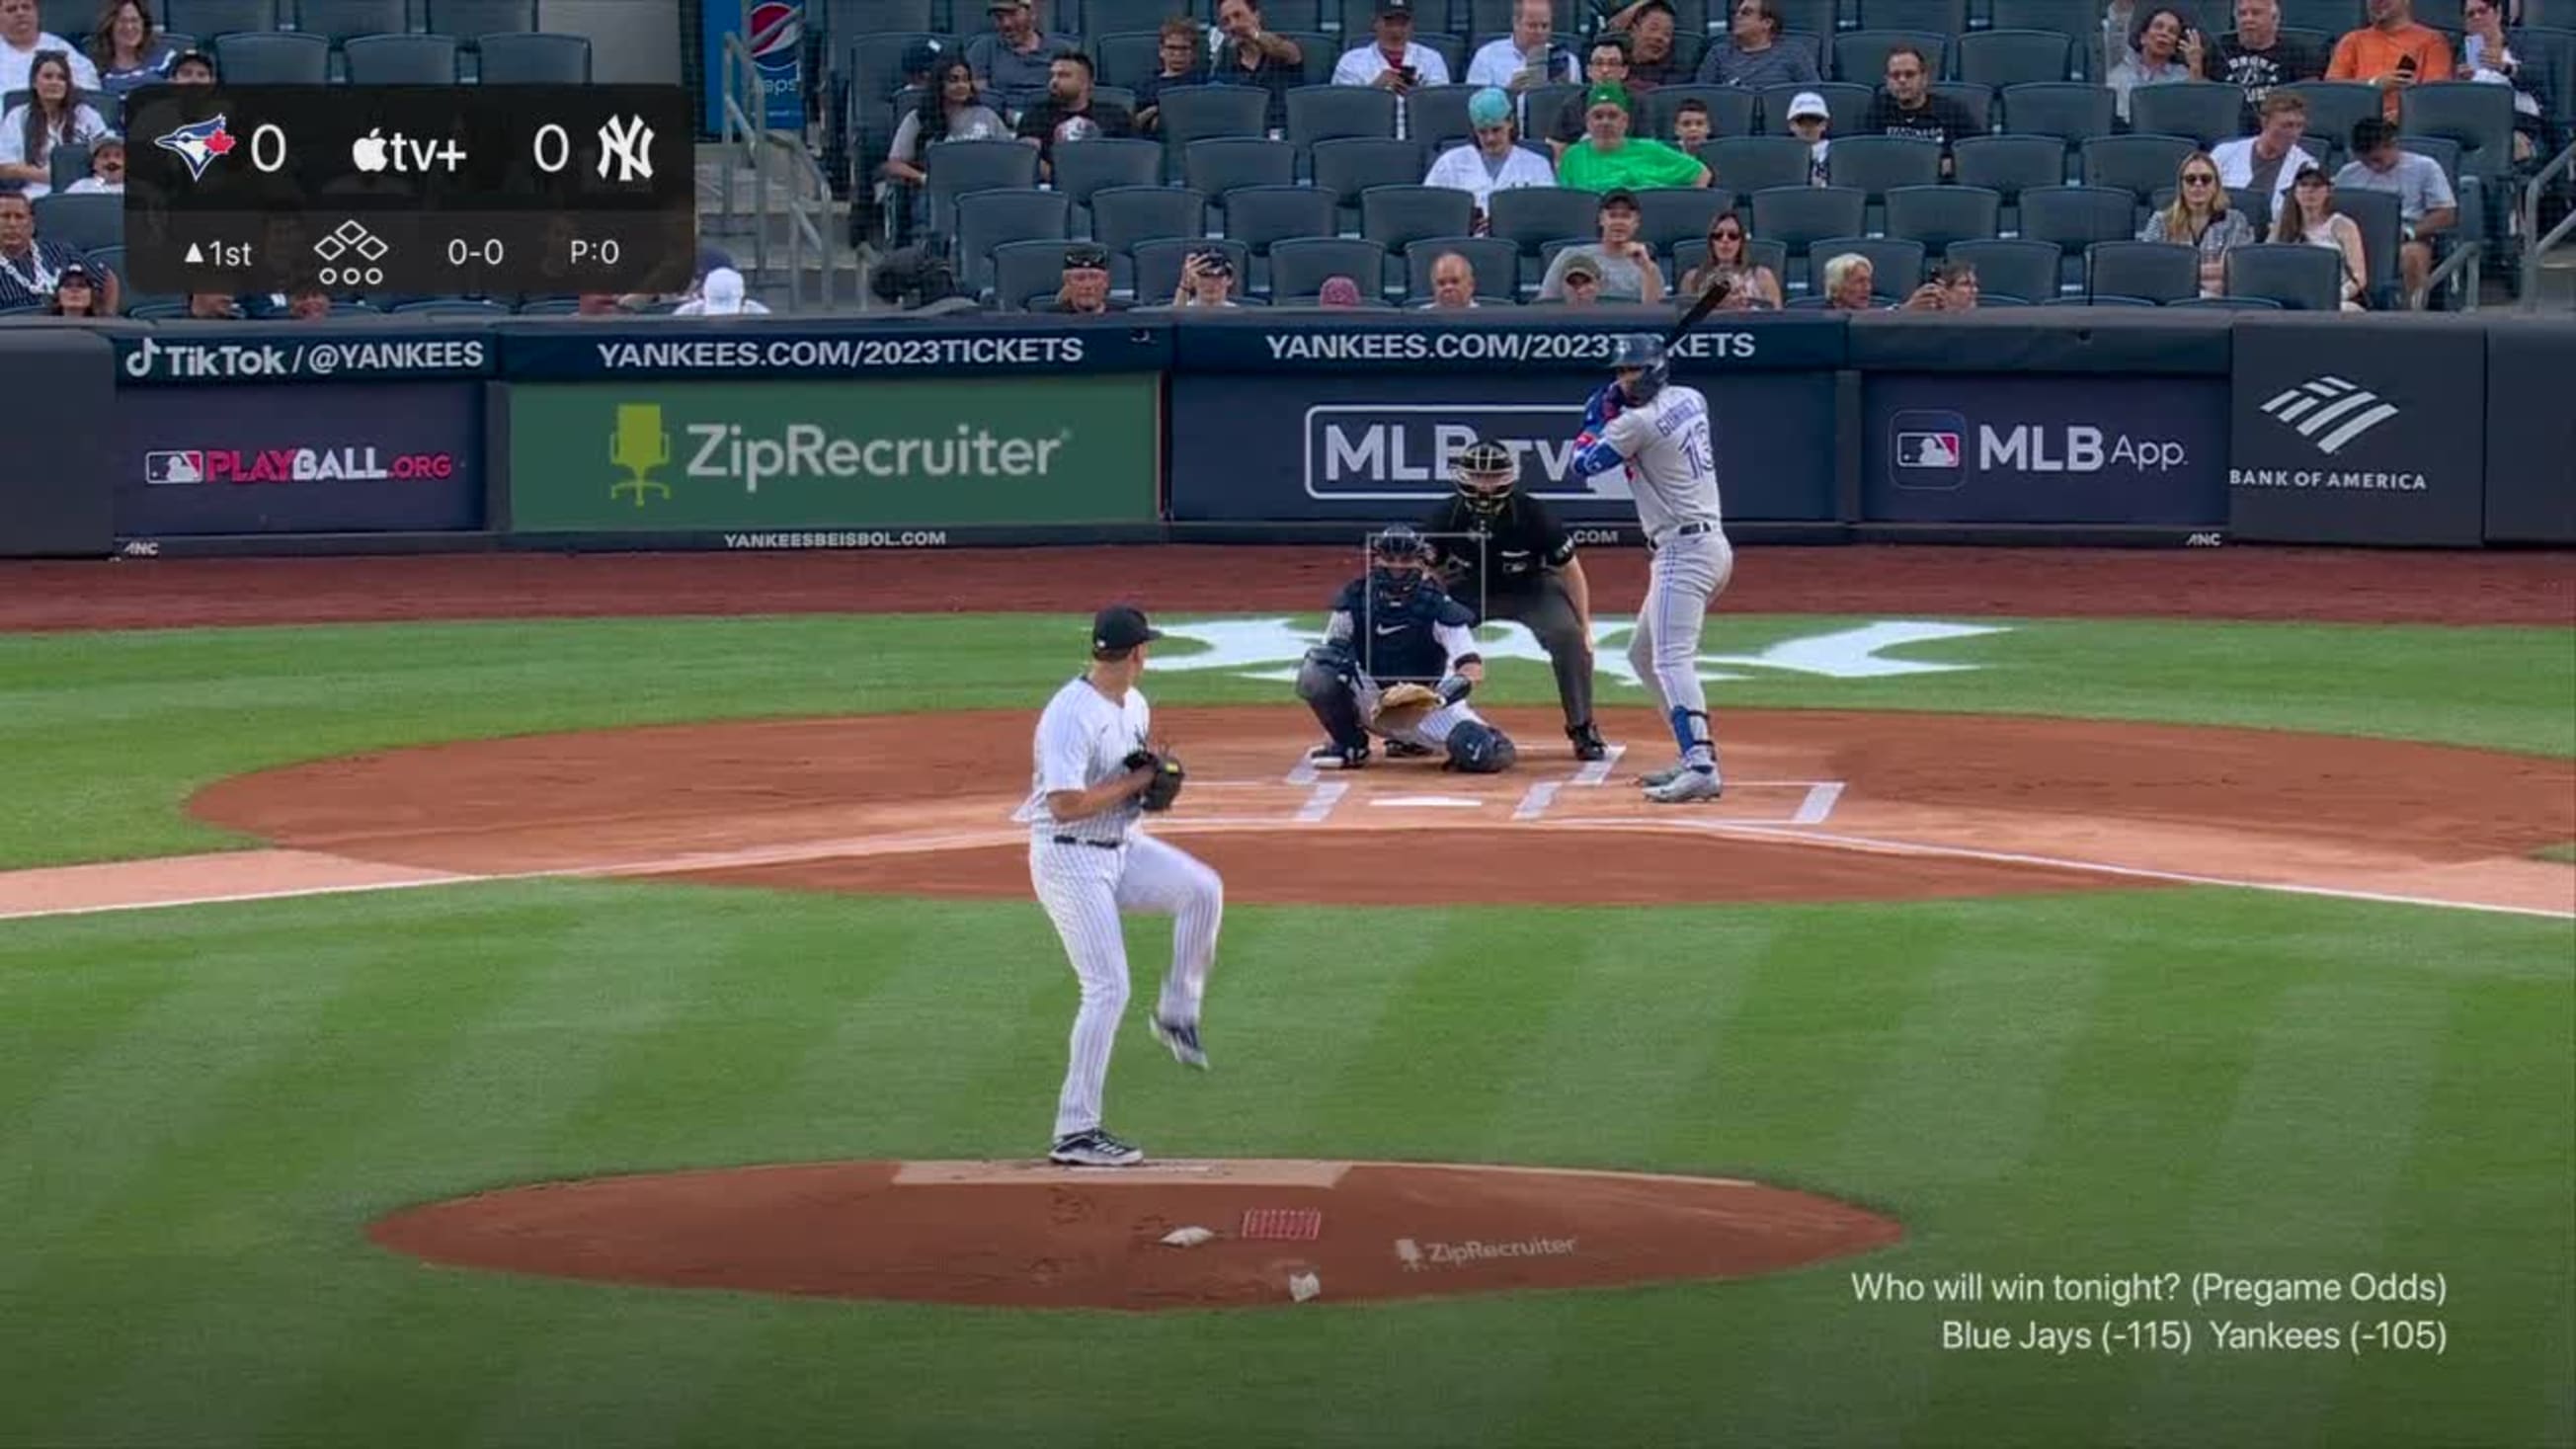 Oswaldo Cabrera hoses down Baty for the final out of the 5th : r/baseball